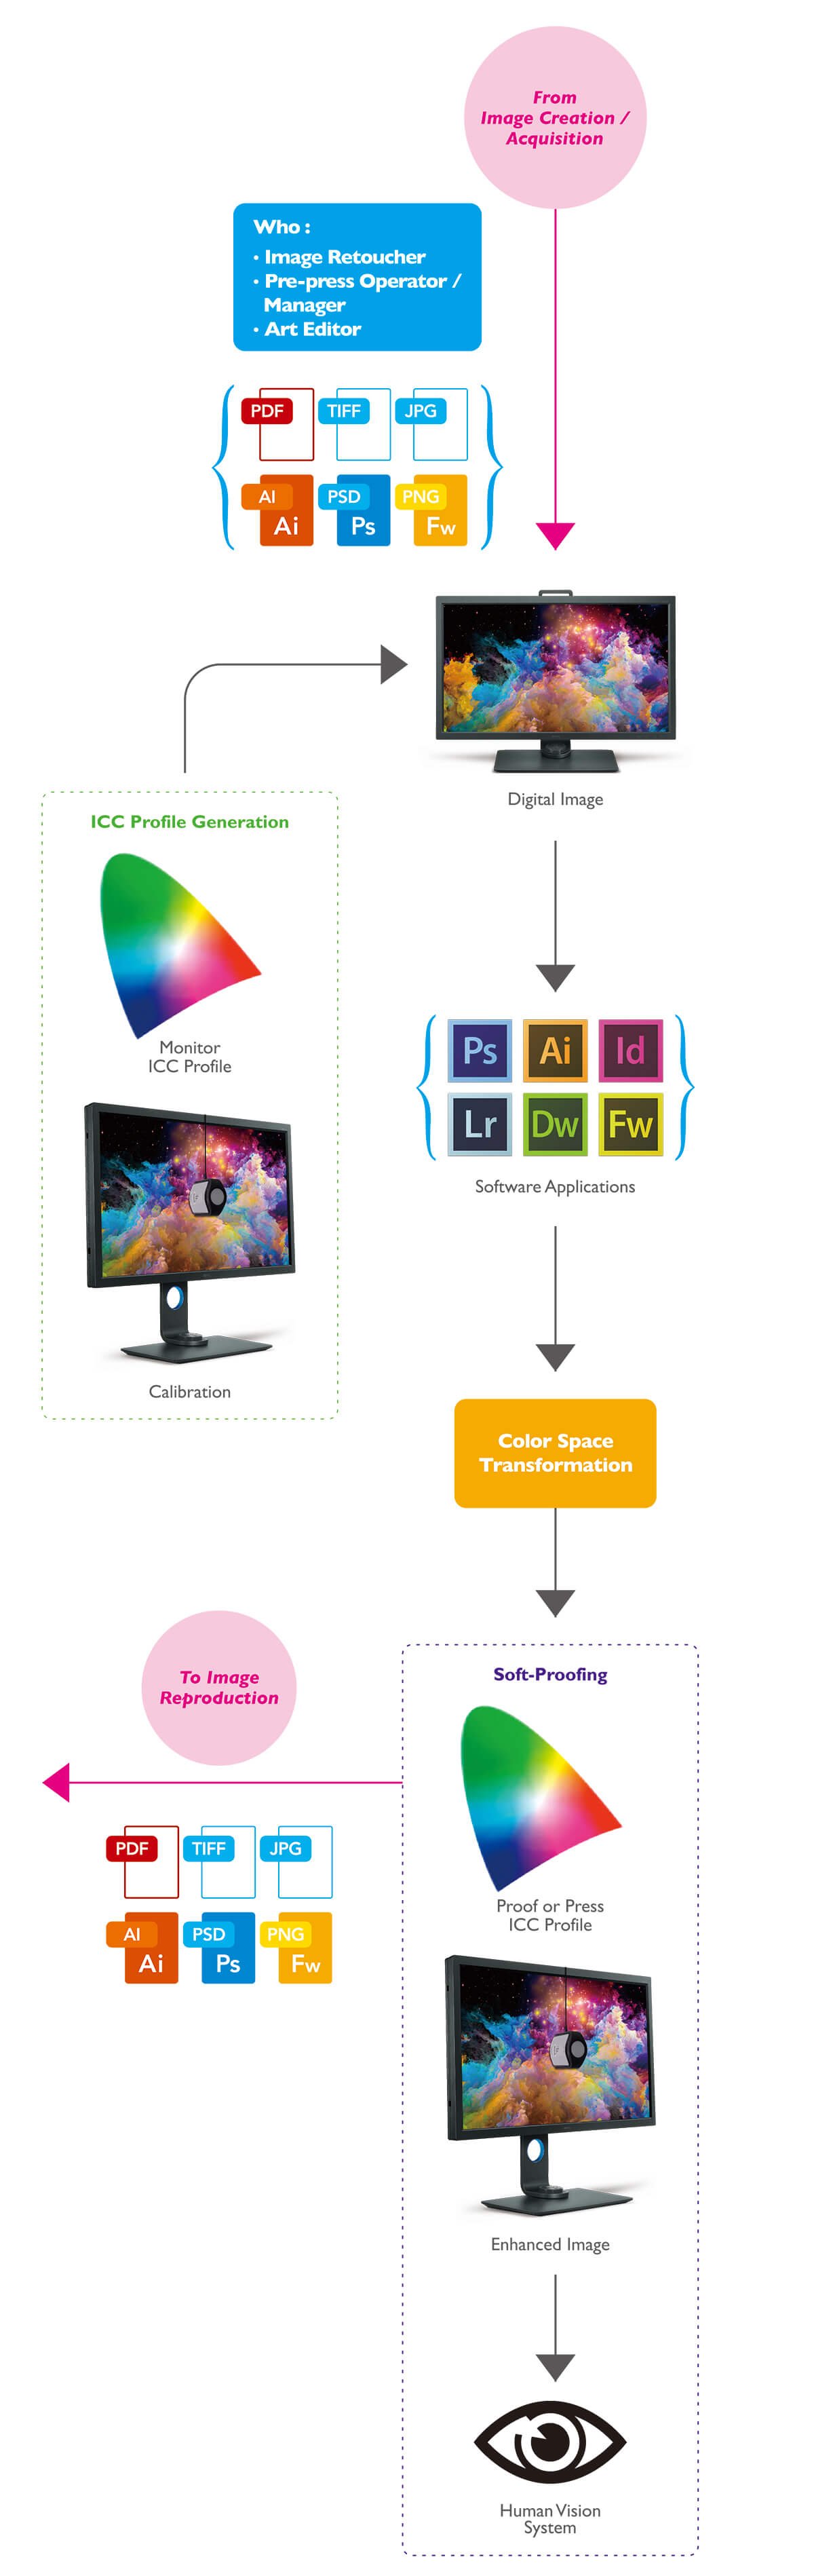 After processing image creation and image acquisition for the first step, professionals like image retoucher, pre-press operators and art editors will apply software applications and calibrated monitor to transform color space to enhance and reproduce the image.